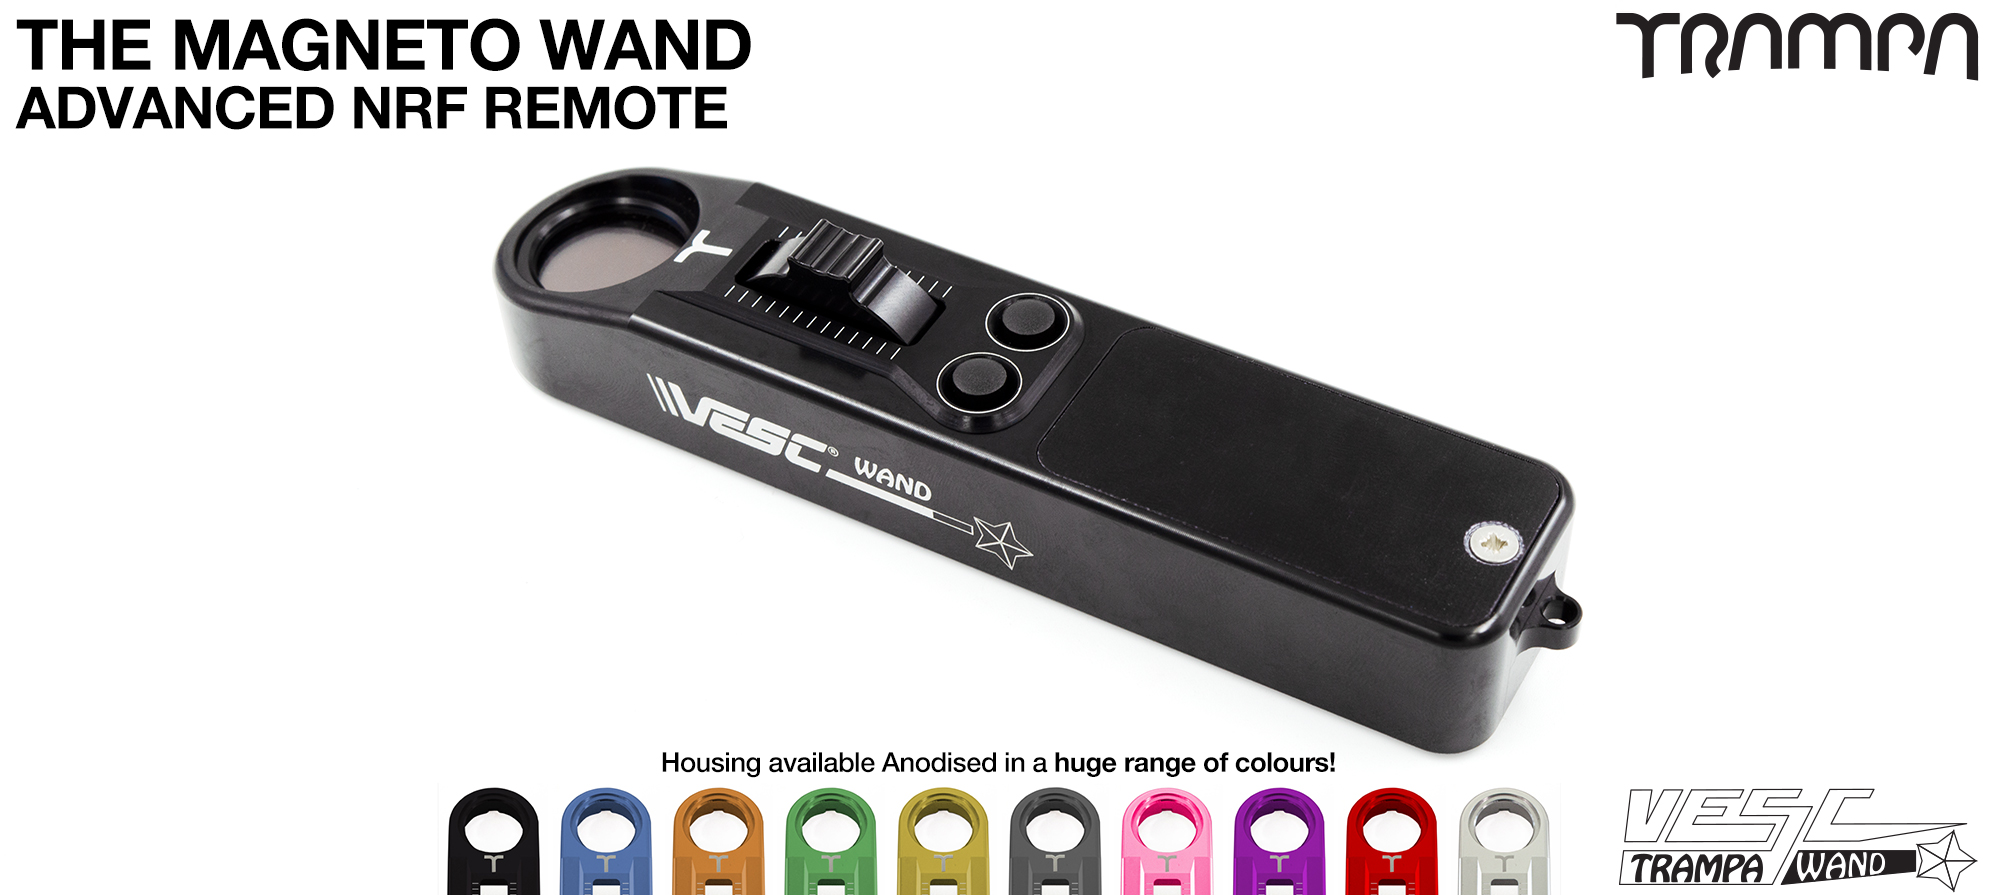 The WAND Remote (+£100)